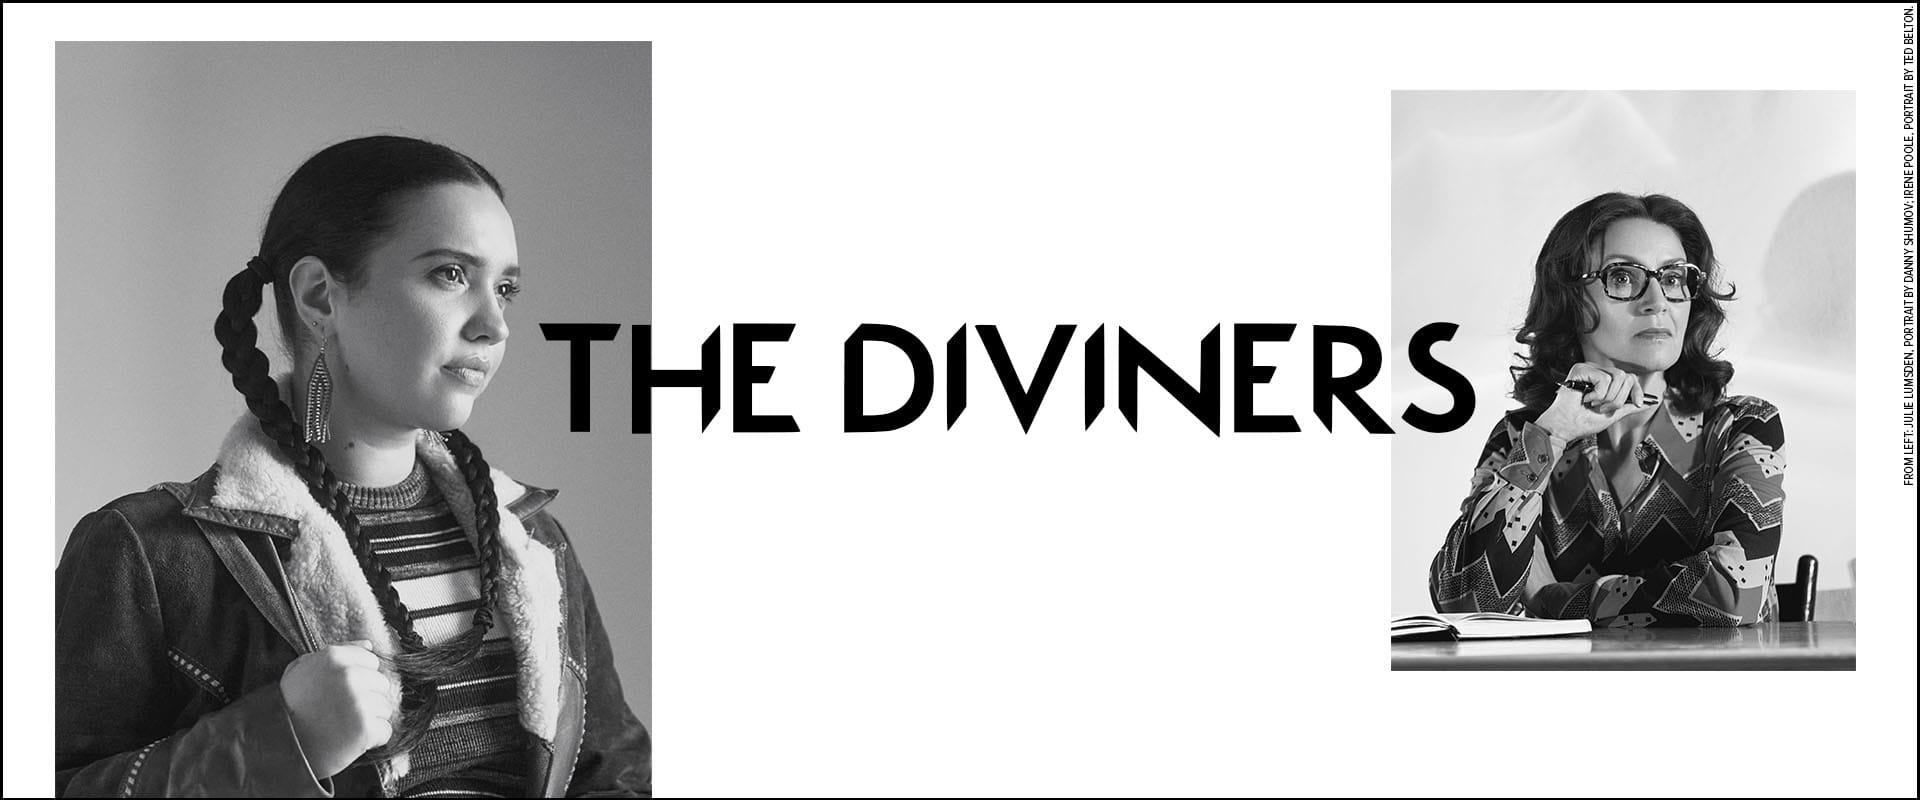                      The Diviners makes the jump to the stage                             
                     